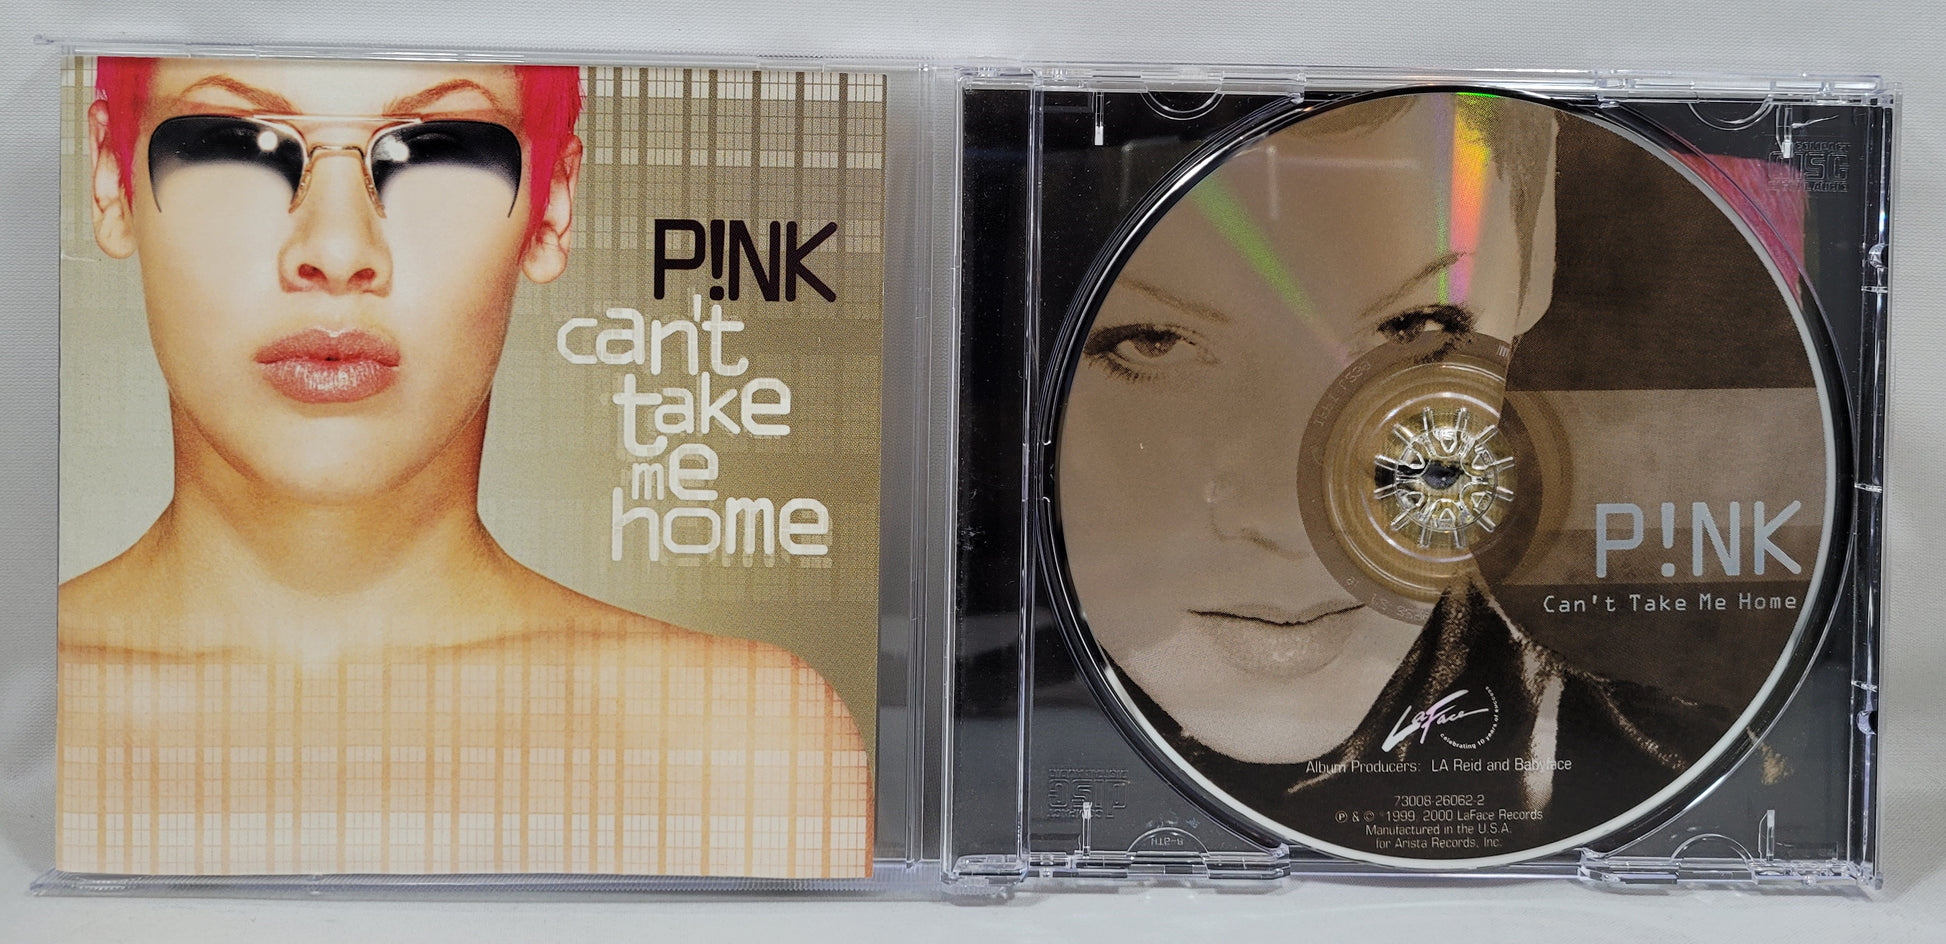 P!NK - Can't Take Me Home [2000 Used CD]